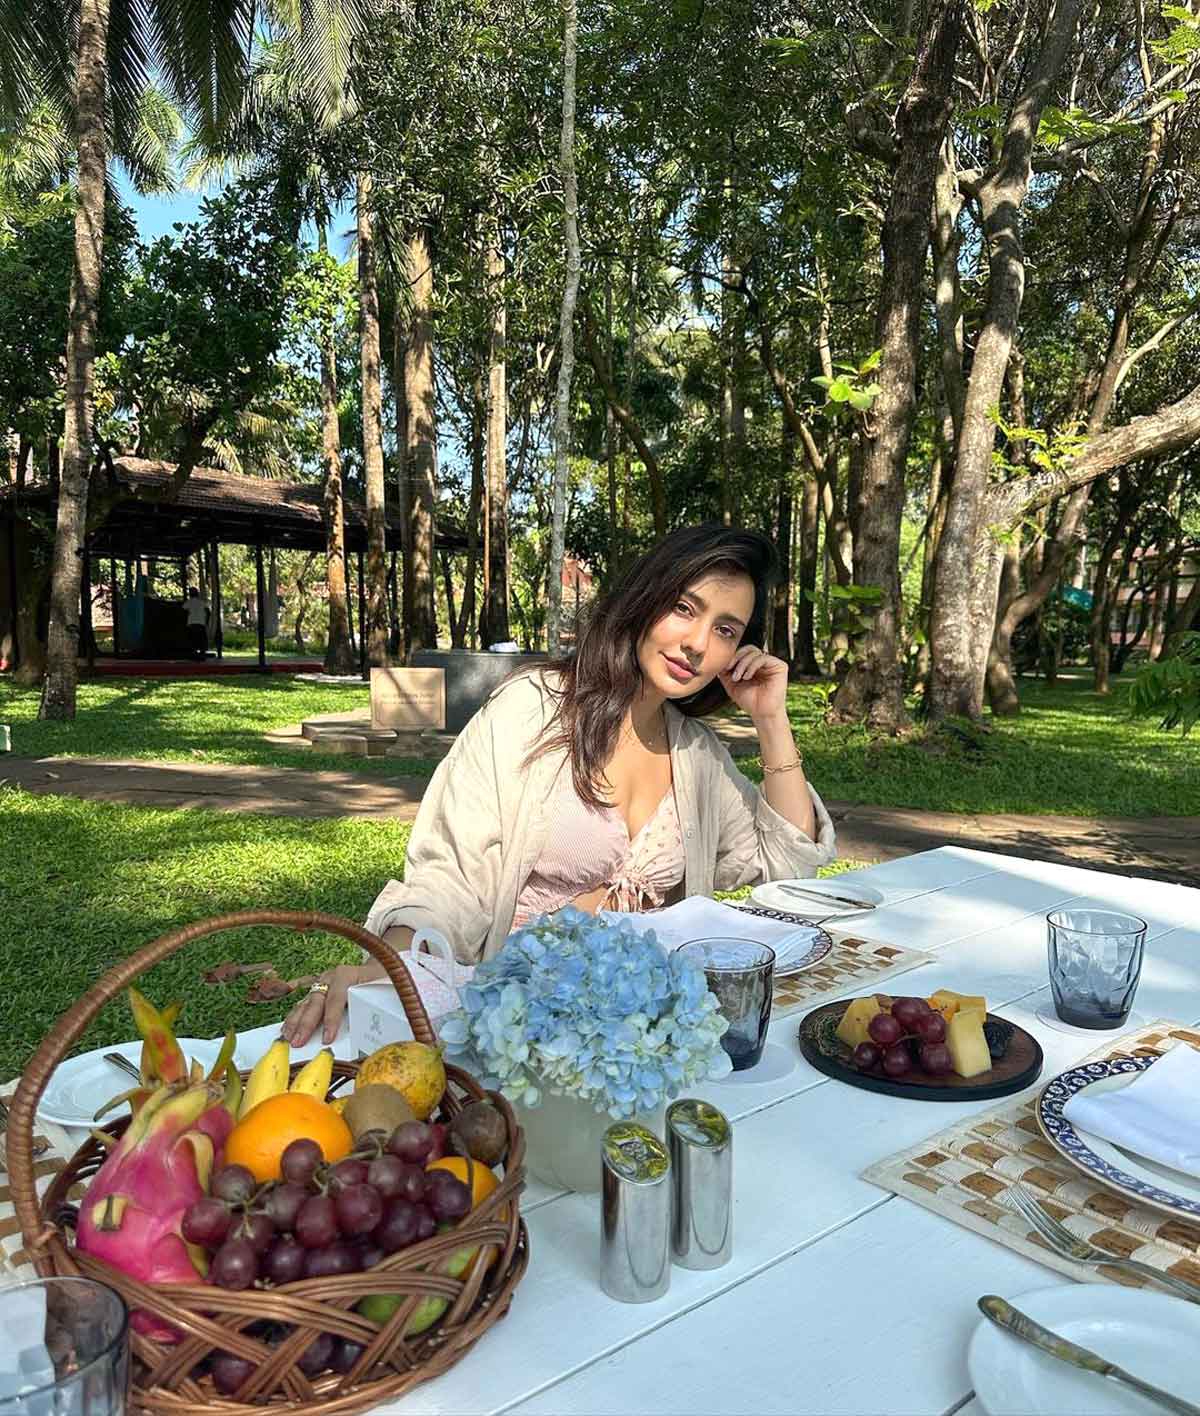 Want To Picnic With Neha?